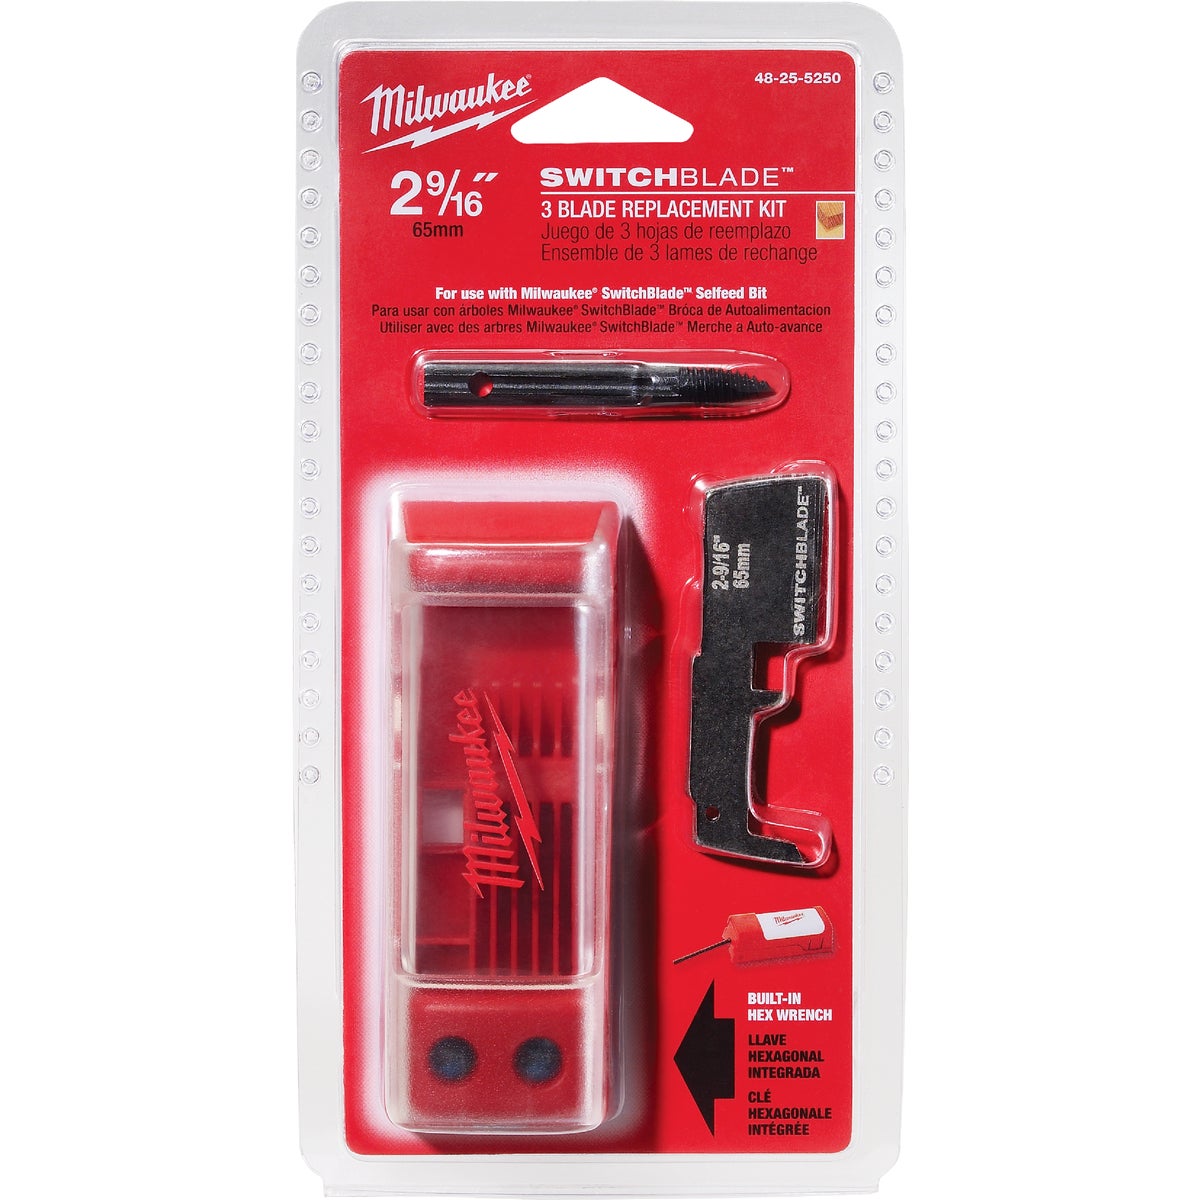 Milwaukee 2-9/16 In. Replacement Blade